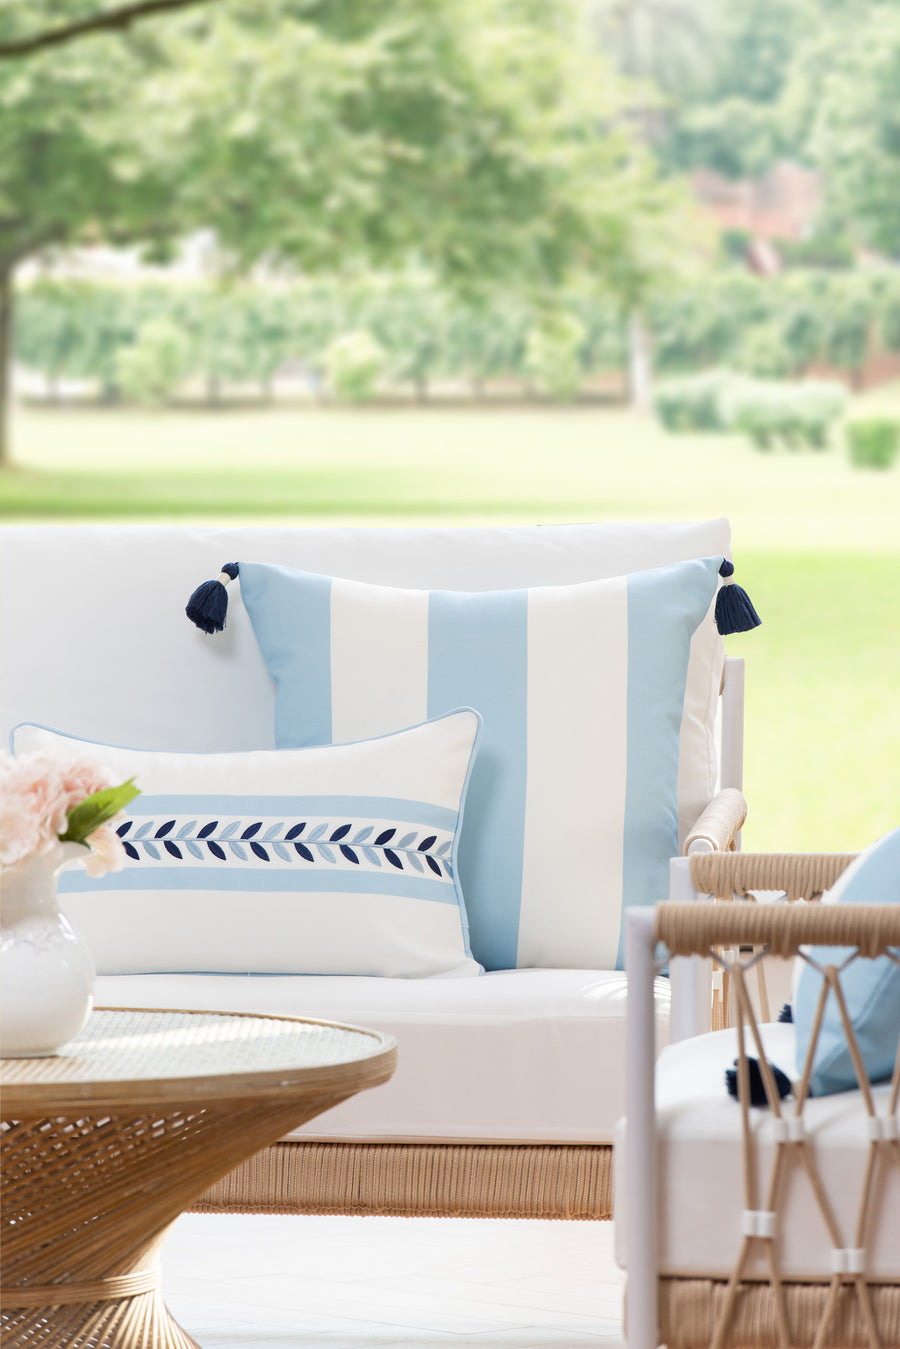 Coastal Indoor Outdoor Lumbar Pillow Cover, Embroidered Frame Leafs with Piping, Baby Blue, 12